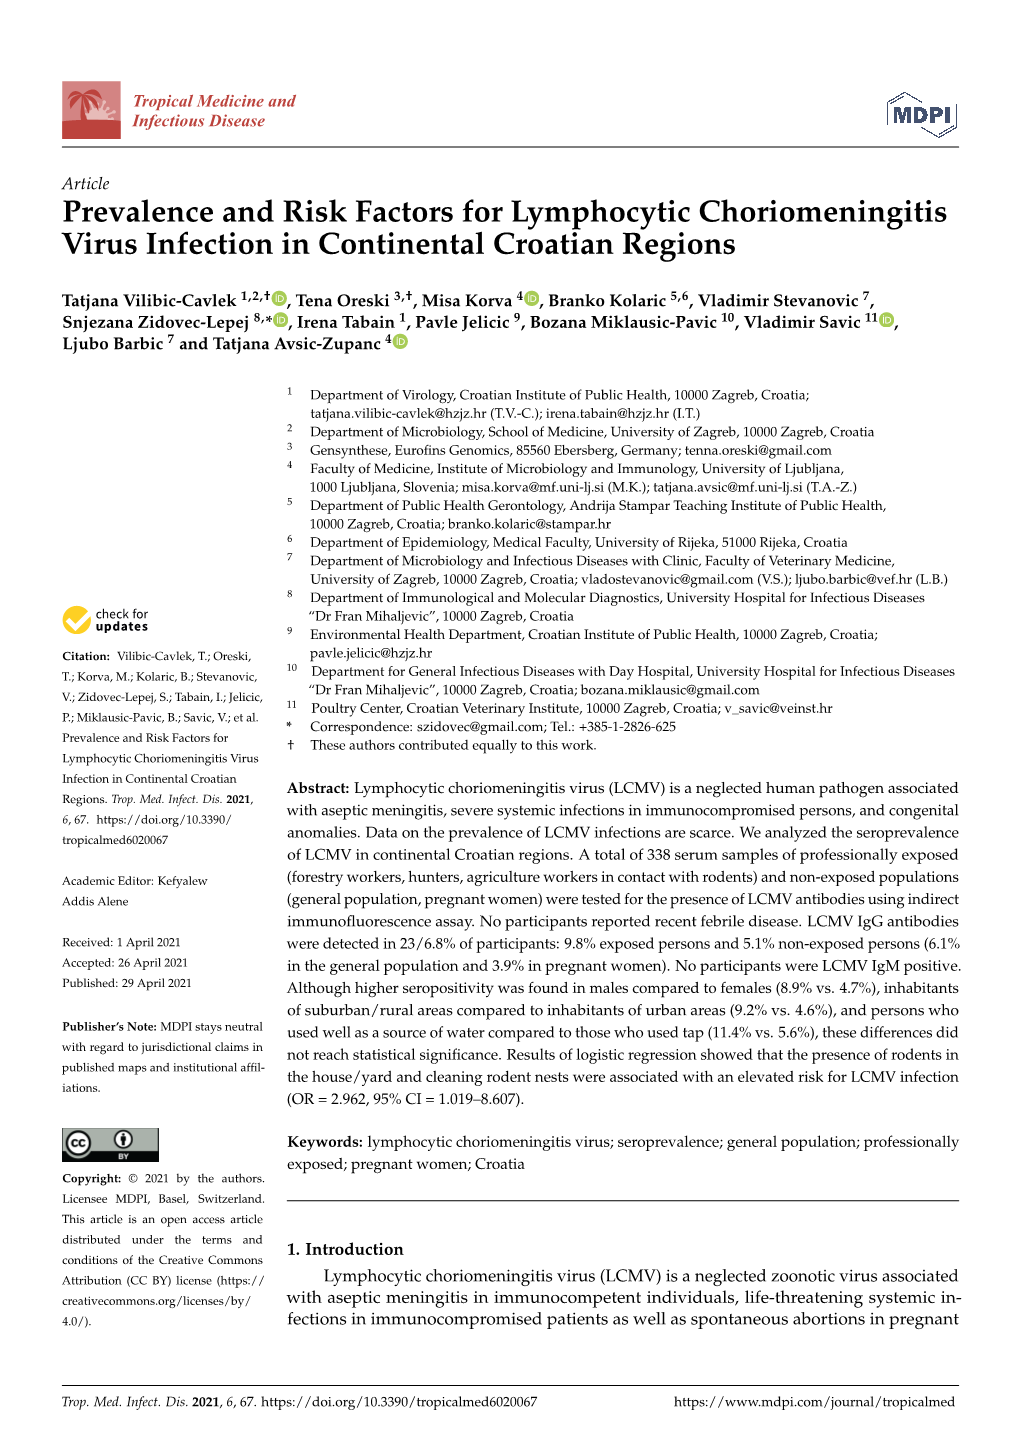 Prevalence and Risk Factors for Lymphocytic Choriomeningitis Virus Infection in Continental Croatian Regions